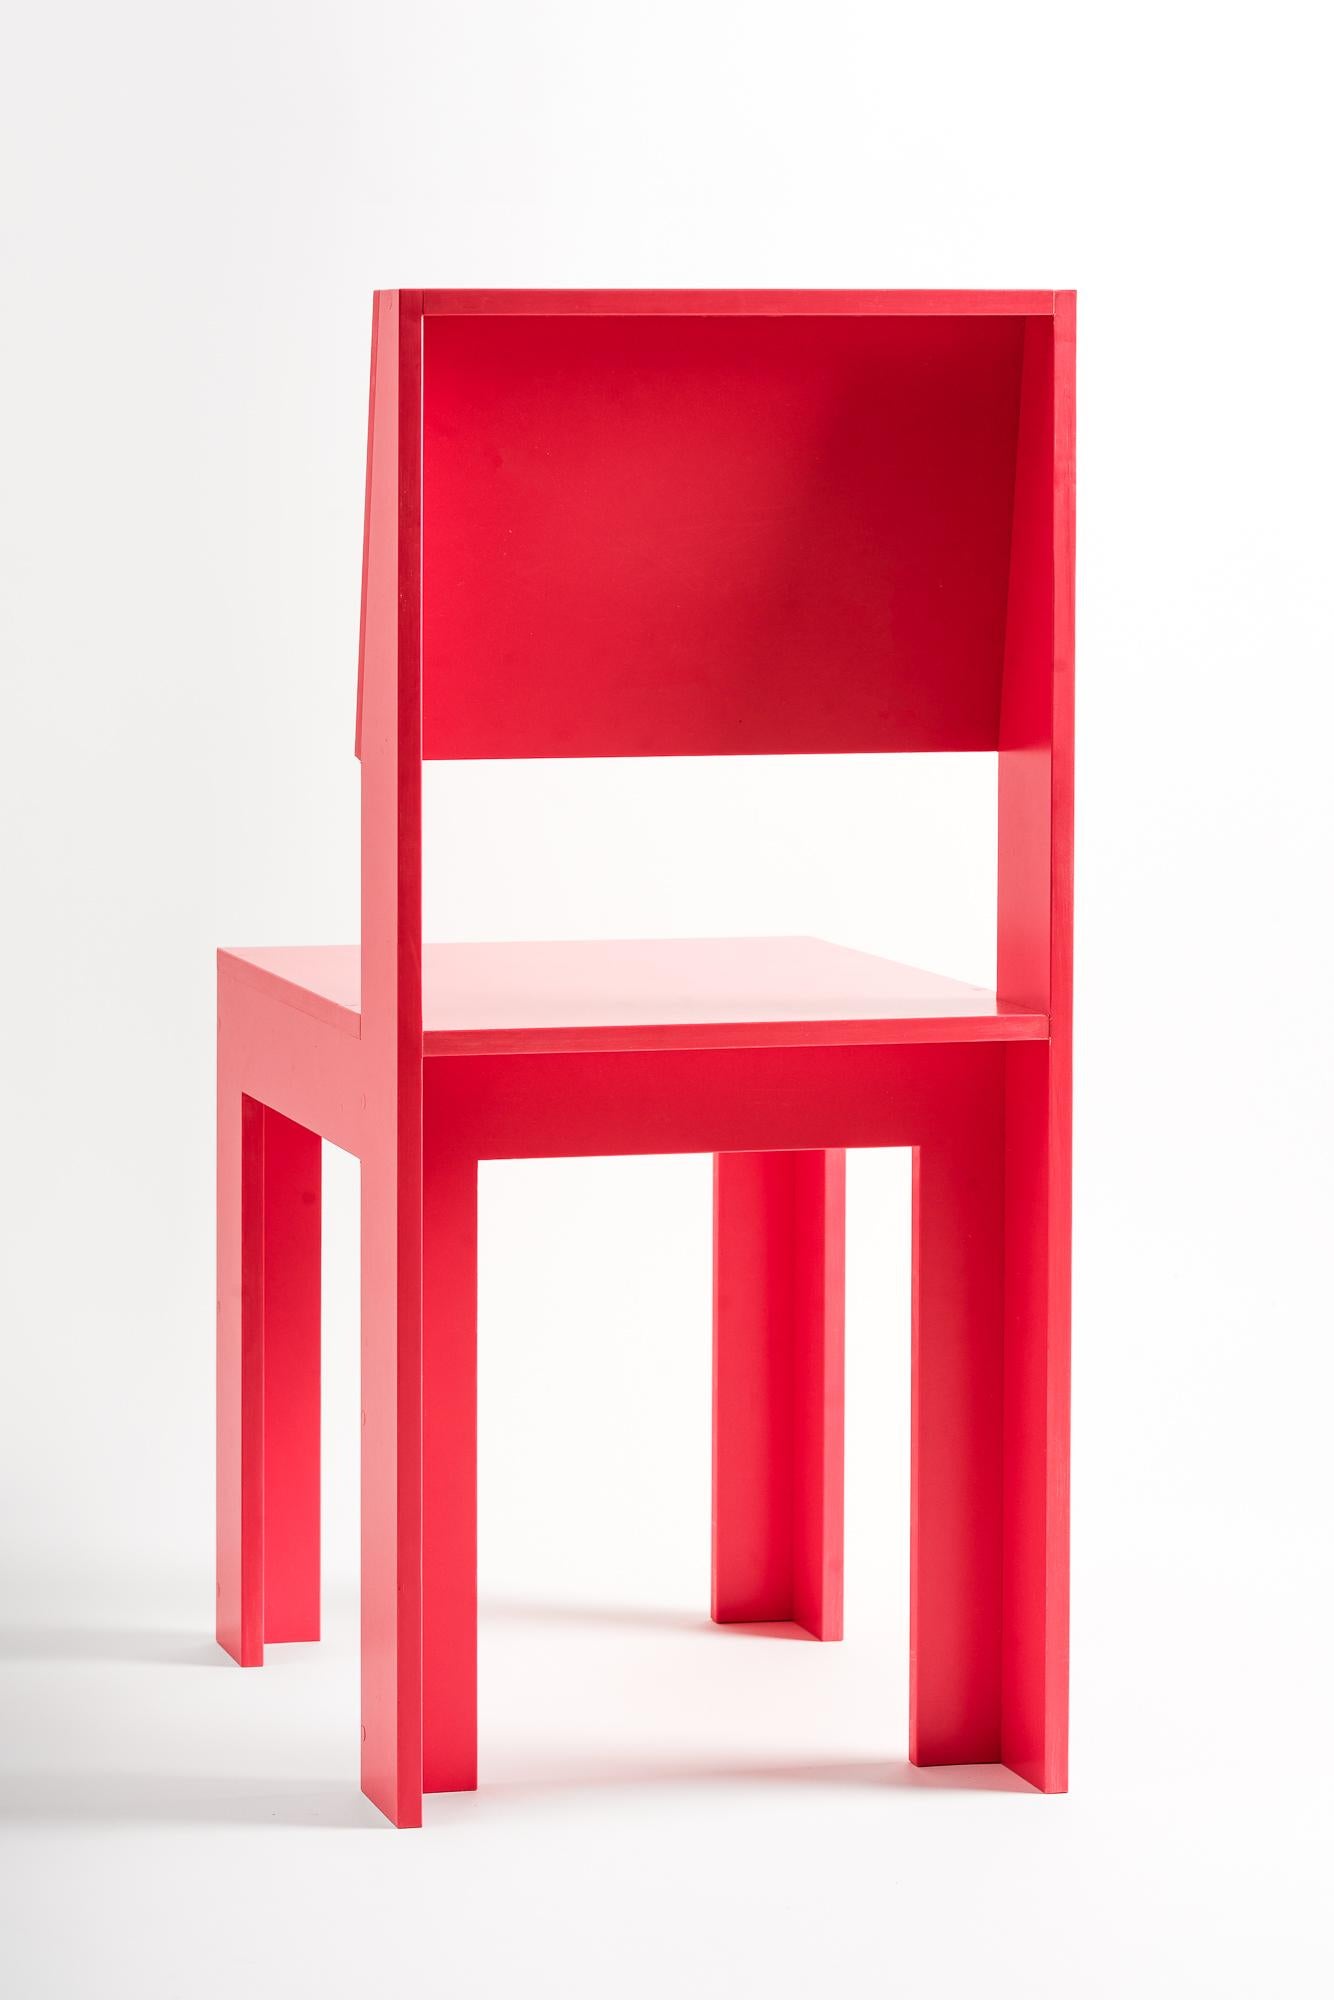 This unique piece is the 2022 re-issue of British-designer Jane Atfield's historical, 'RCP2 Chair,' an iconic example of sustainable design, to commemorate the 30th anniversary of the piece.

Additional Information:
This series of re-editioned